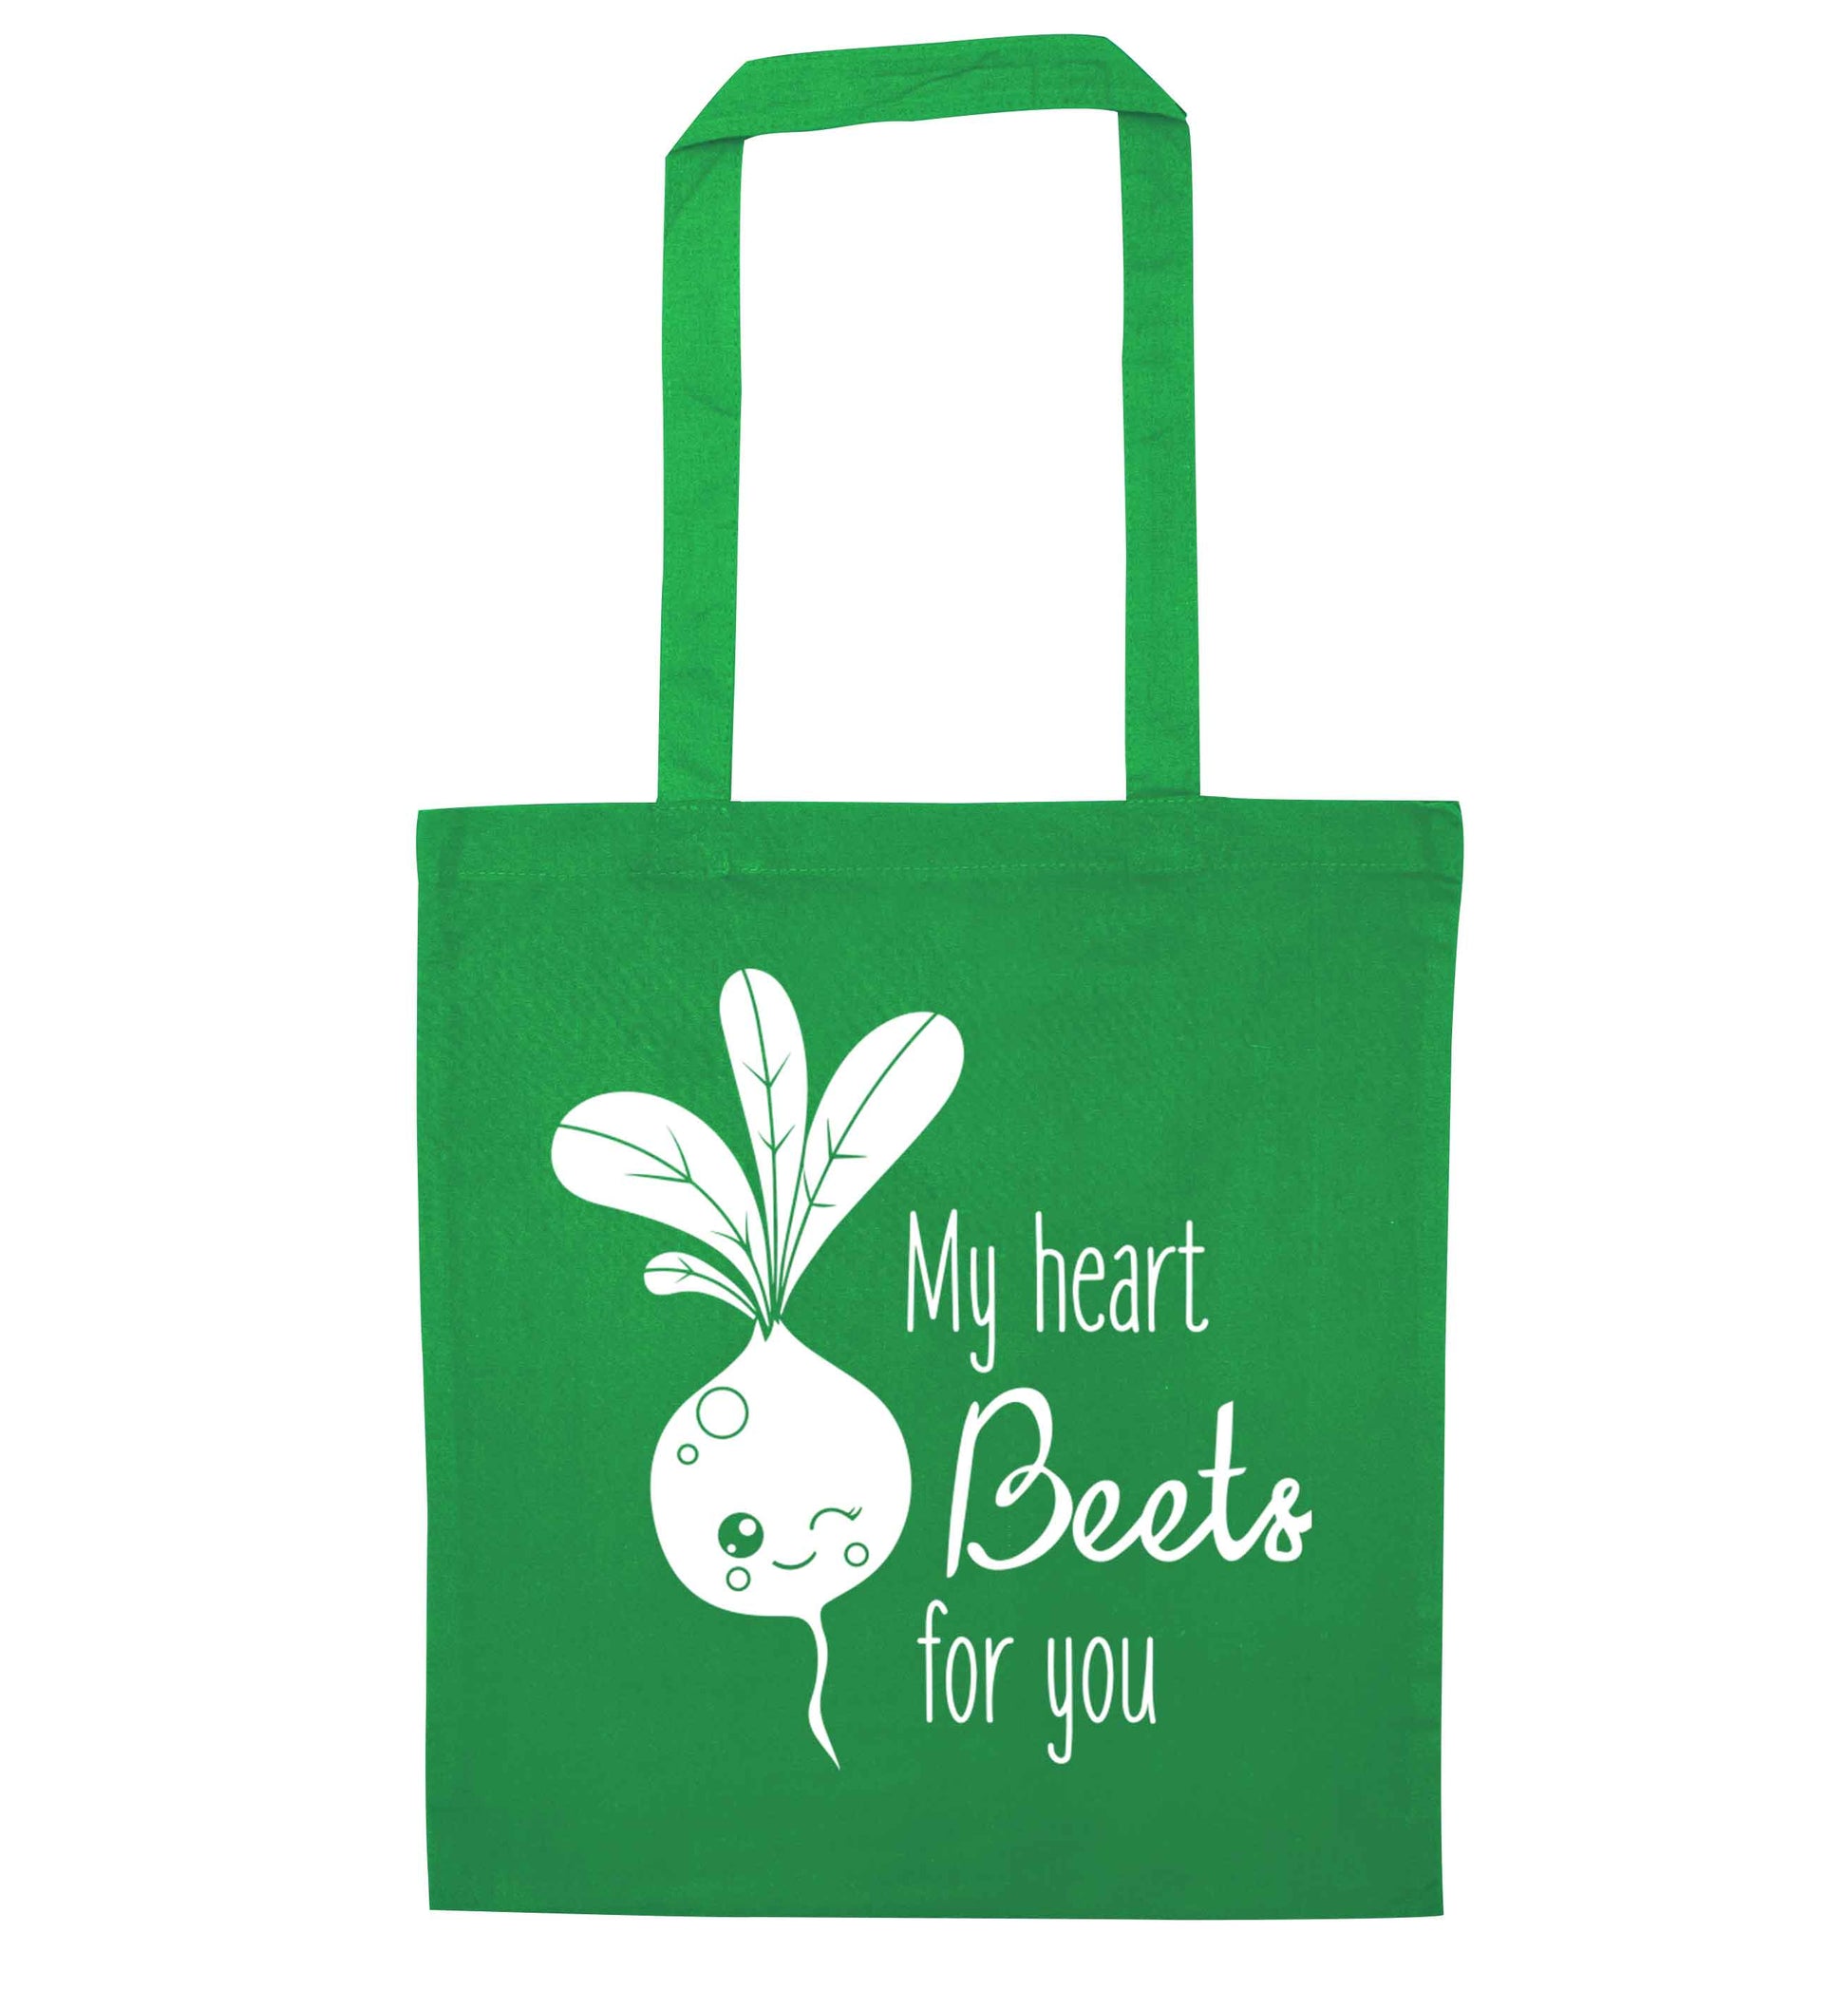 My heart beets for you green tote bag